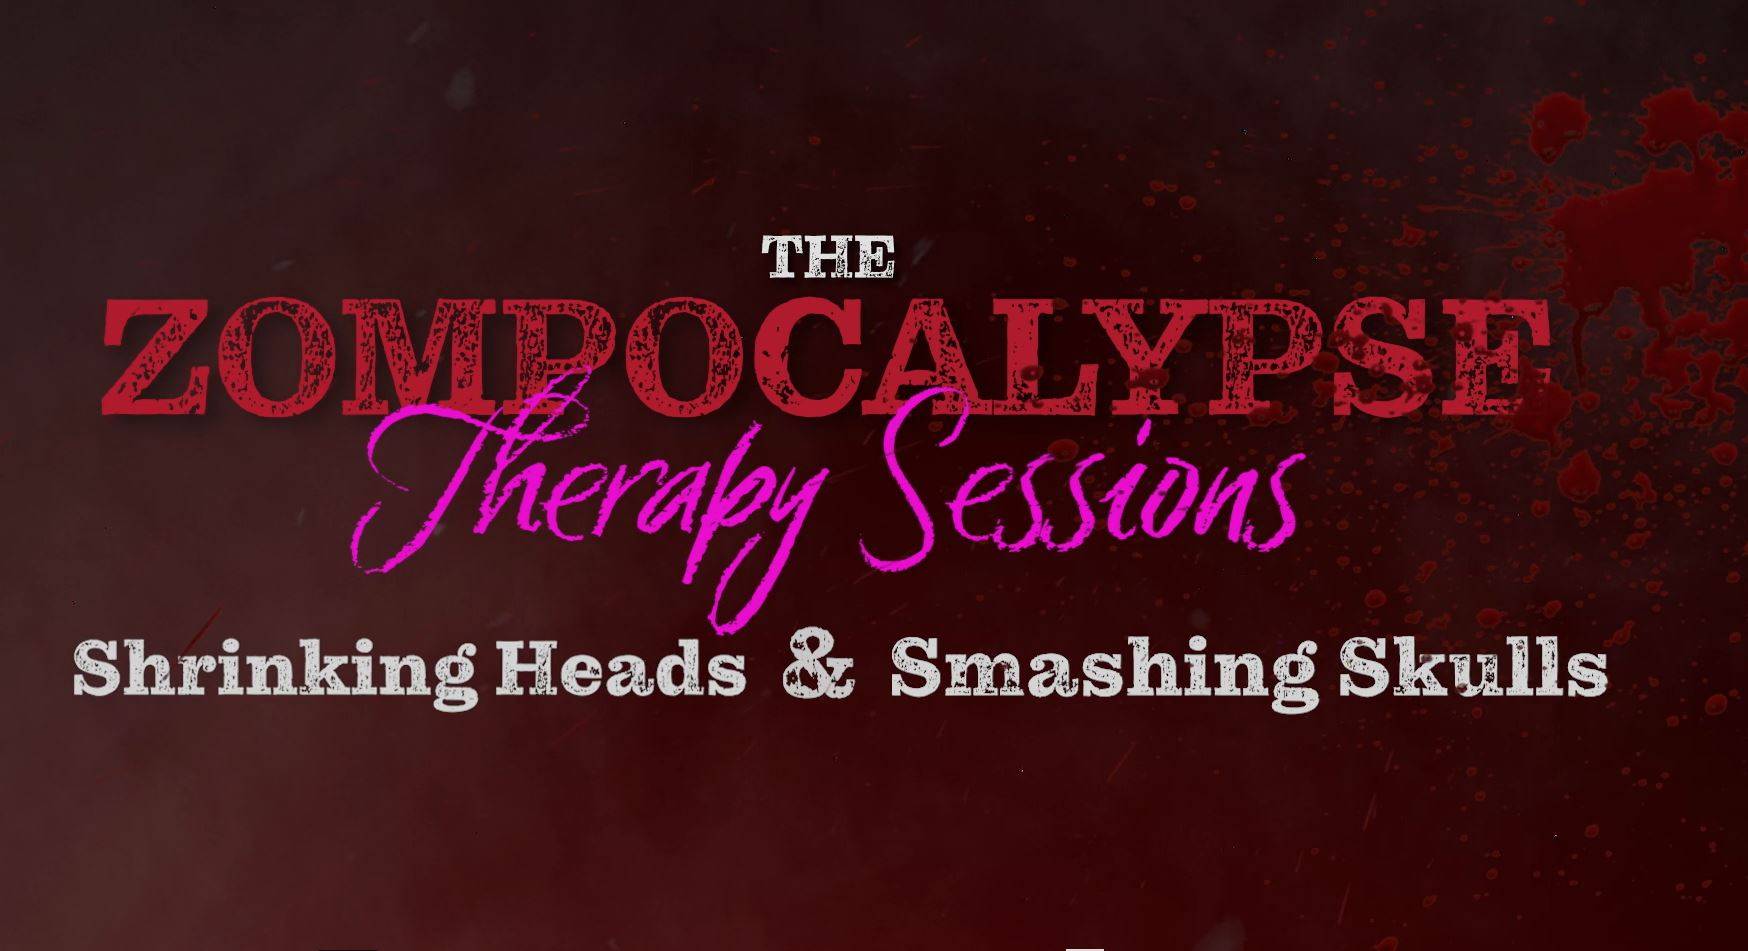 Zompocalypse Therapy Sessions 2